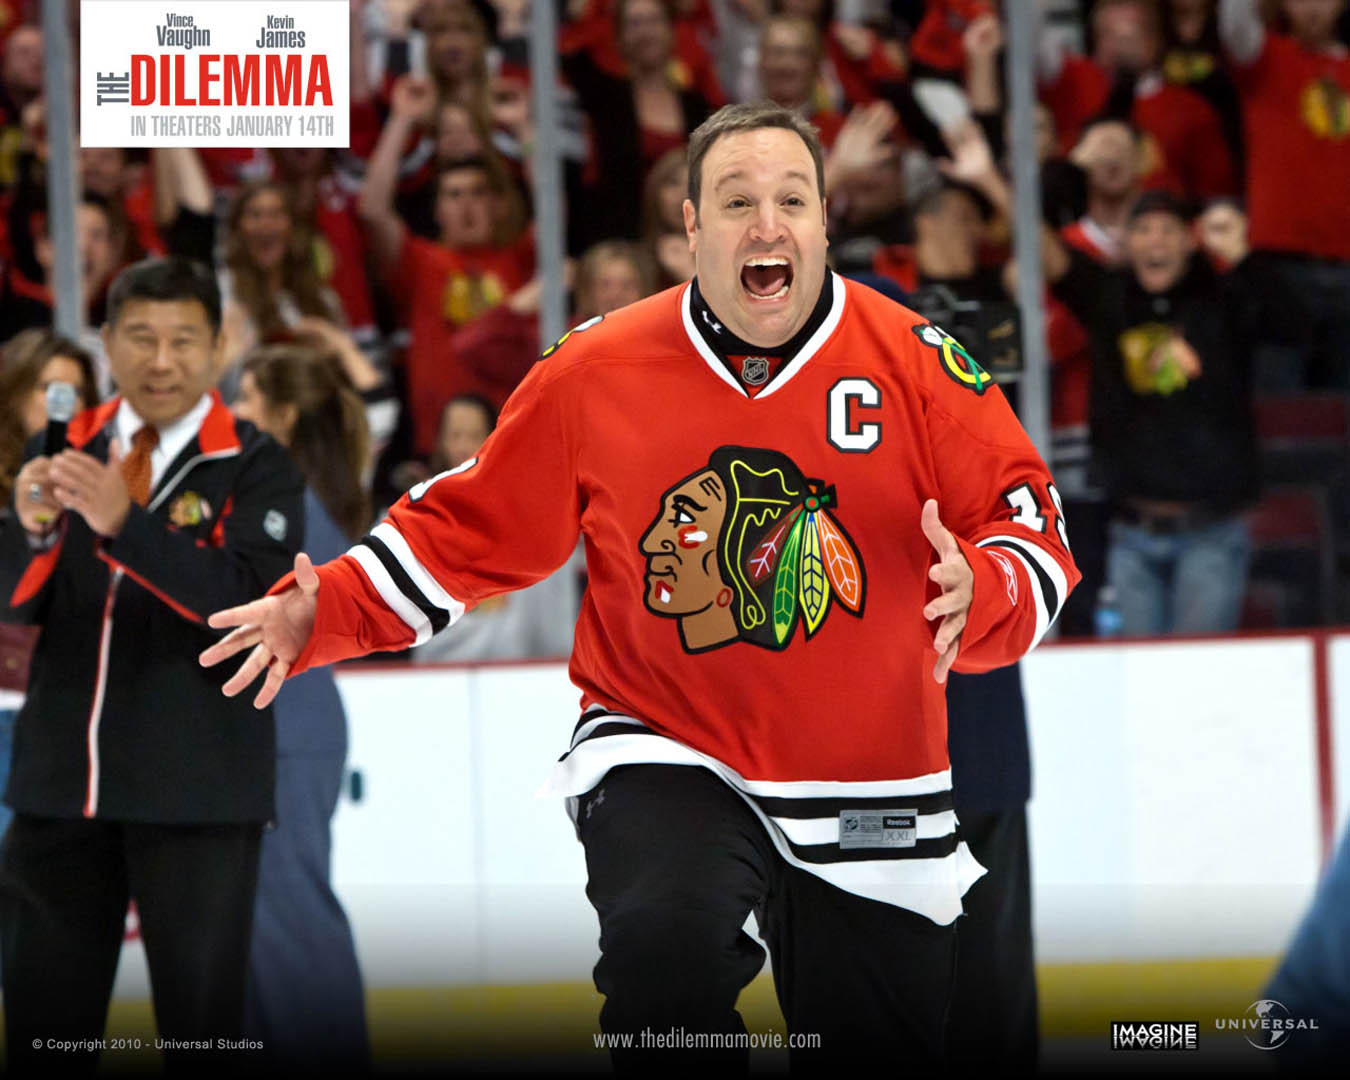 Drama Kevin James In The Dilemma